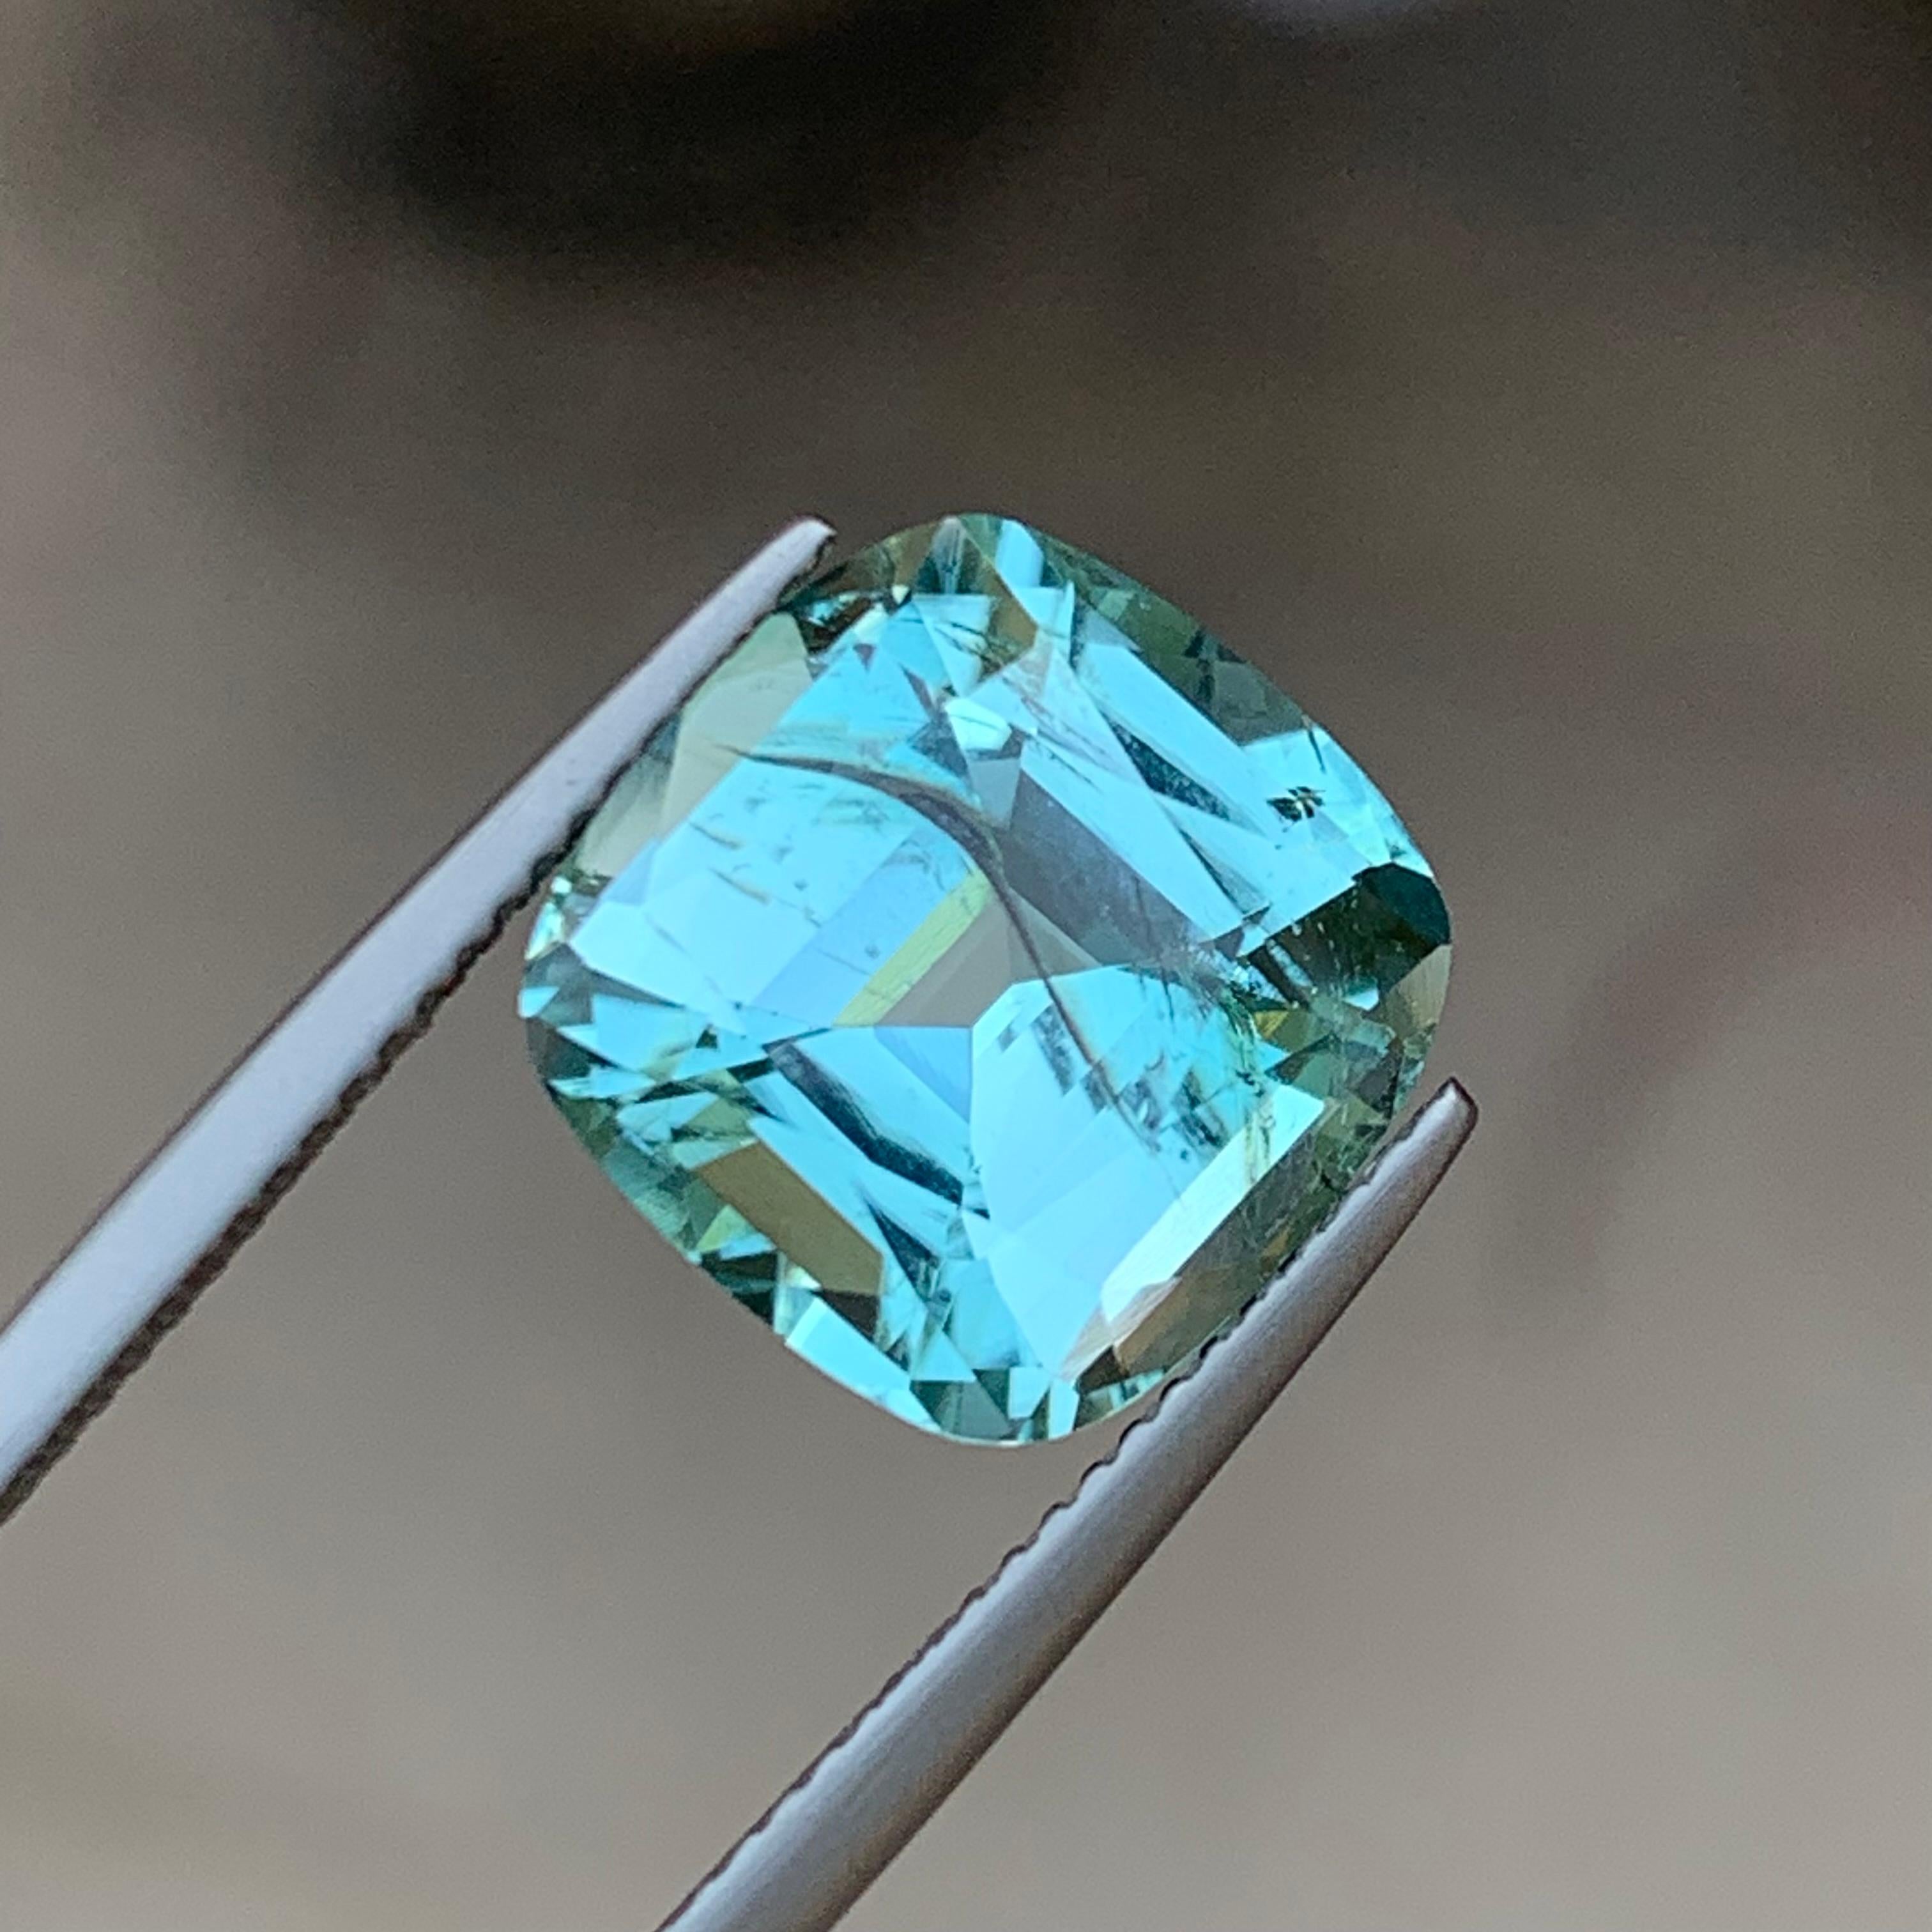 GEMSTONE TYPE: Tourmaline
PIECE(S): 1
WEIGHT: 7.75 Carats
SHAPE: Square Cushion 
SIZE (MM): 12.11 x 12.11 x 7.70
COLOR: Seafoam Blue
CLARITY: Slightly Included 
TREATMENT: None
ORIGIN: Afghanistan
CERTIFICATE: PEW2404540933

Truly magnificent 7.75